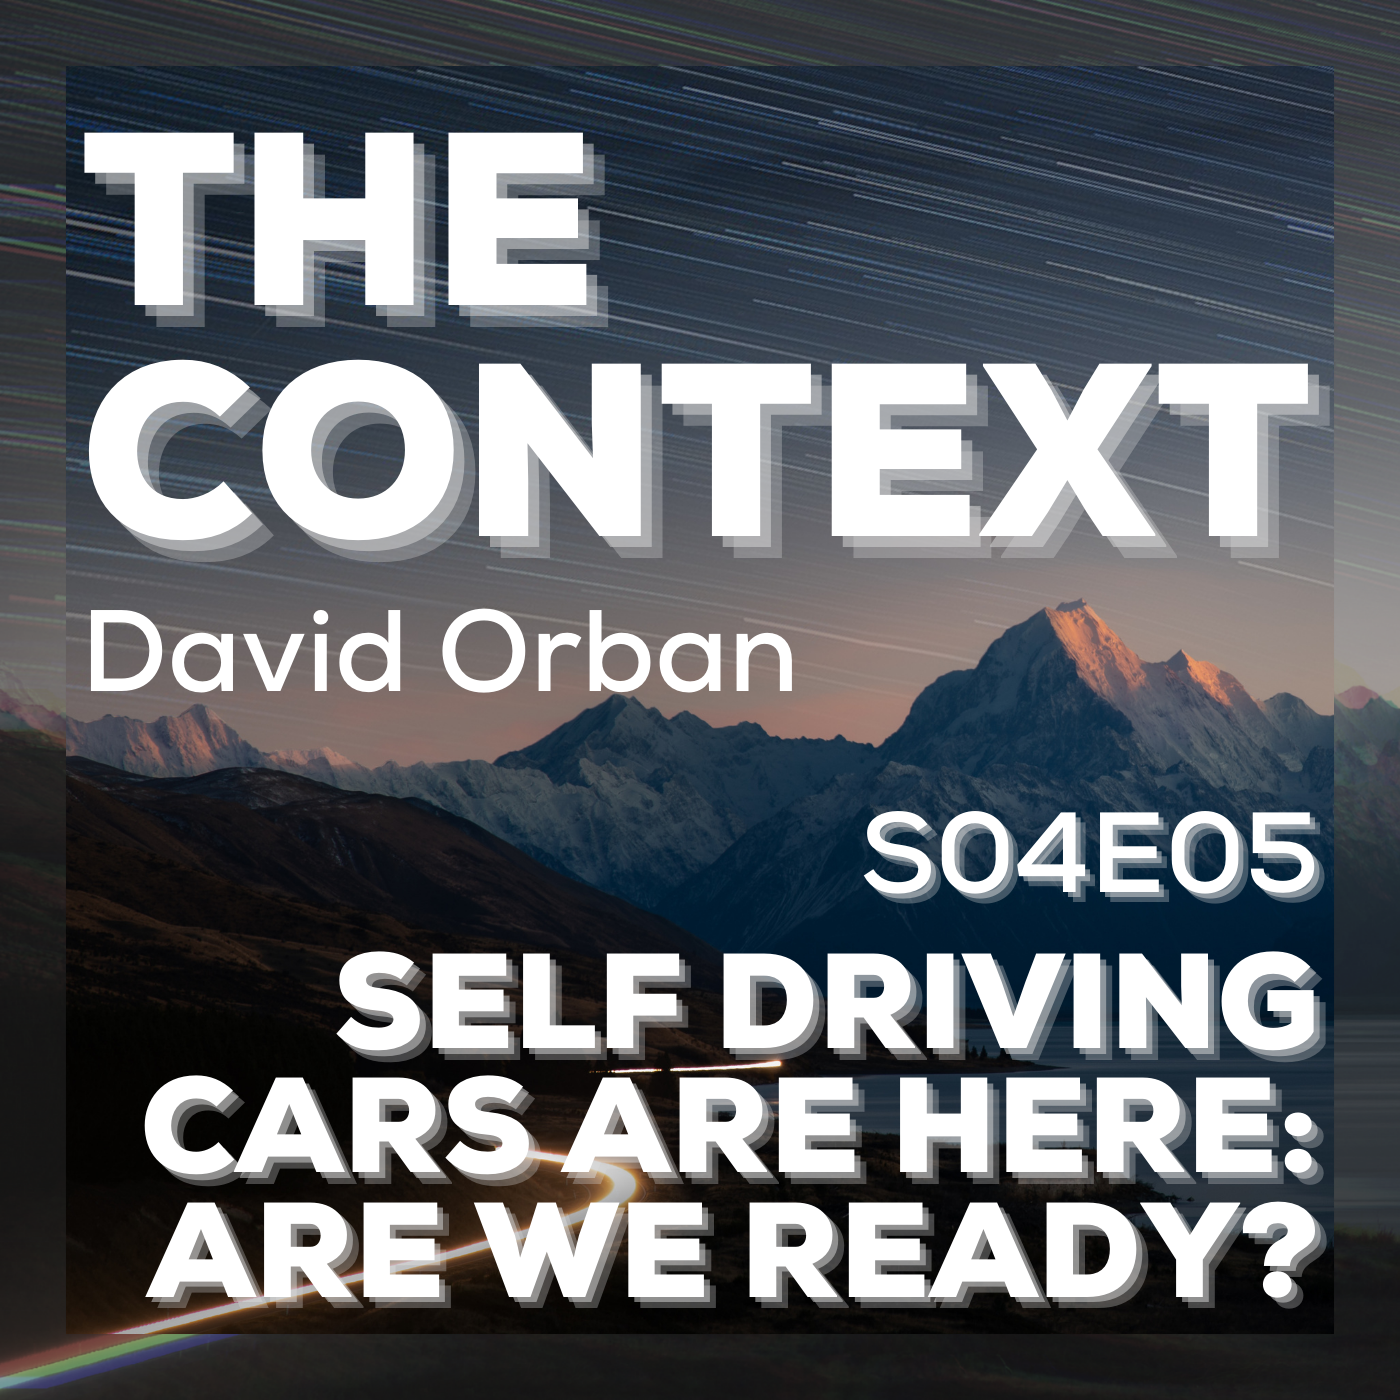  Self Driving Cars Are Here: Are We Ready? - The Context S04E05